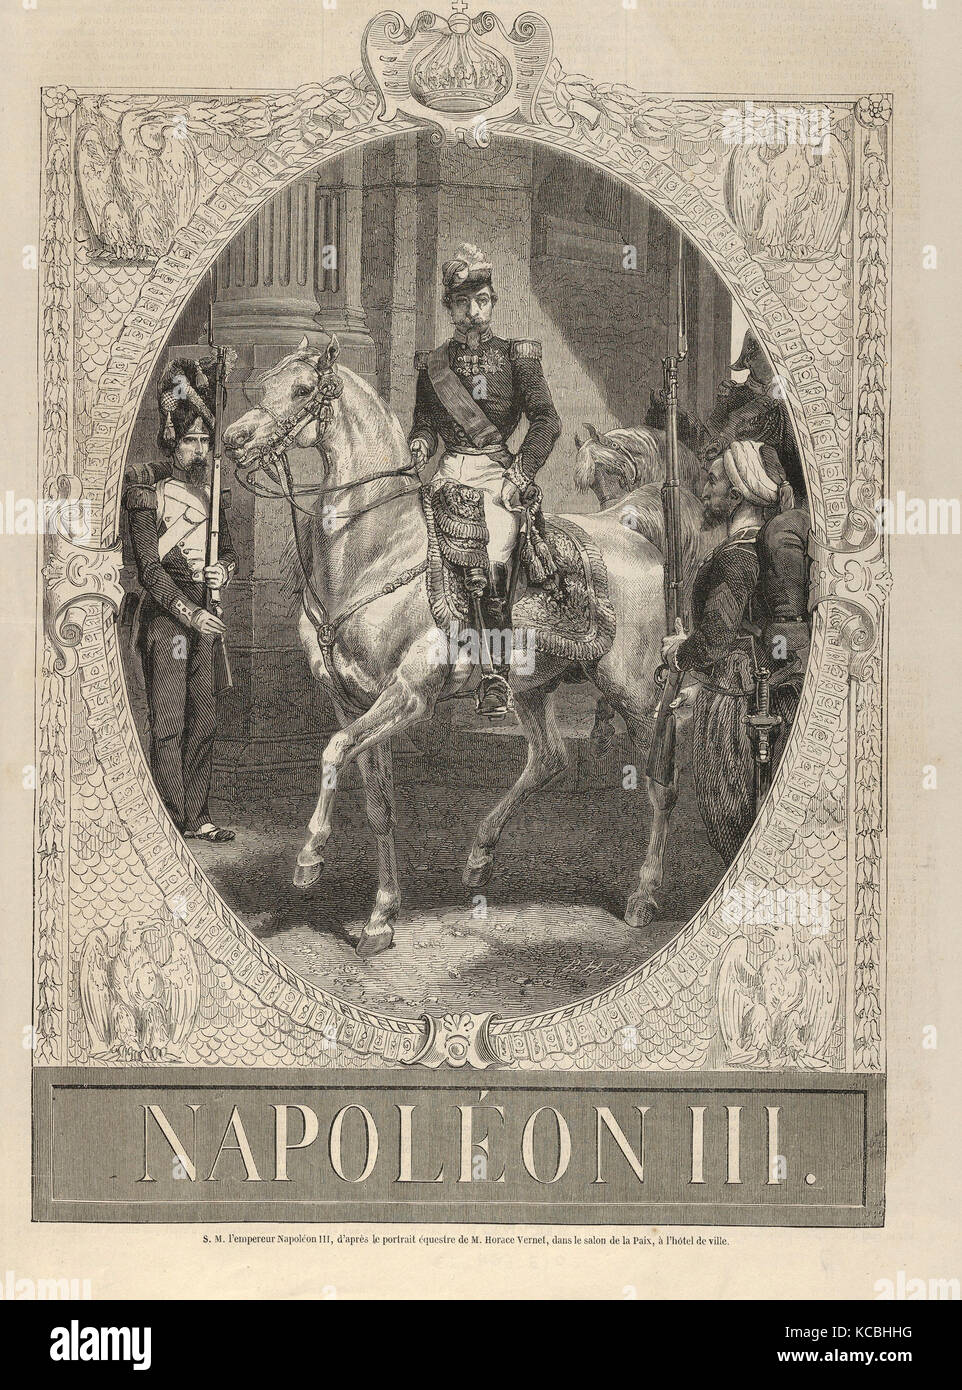 Drawings and Prints, Print, Napoléon III (from L'Illustration), Artist, Engraver, After, Horace Vernet, Anonymous, French Stock Photo